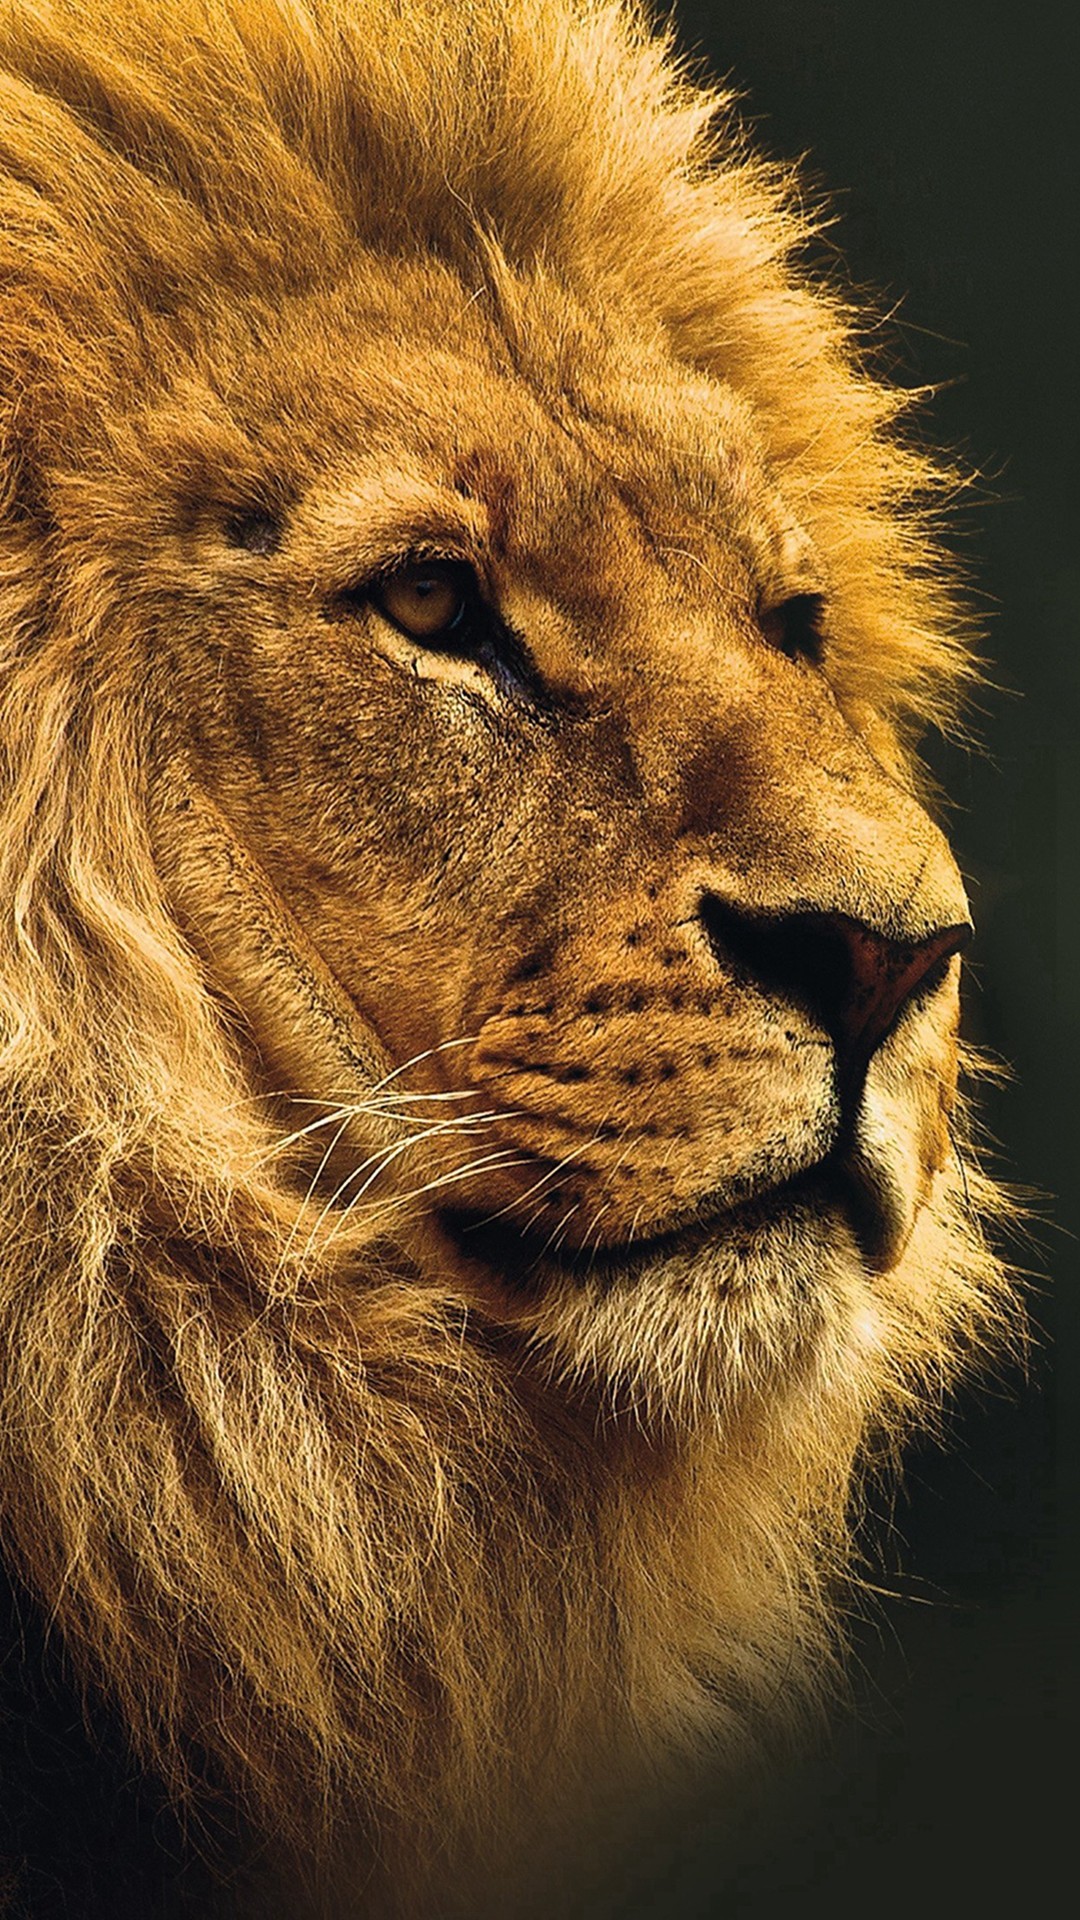 1080x1920 National Geographic Nature Animal Lion Yellow iPhone 8 wallpaper